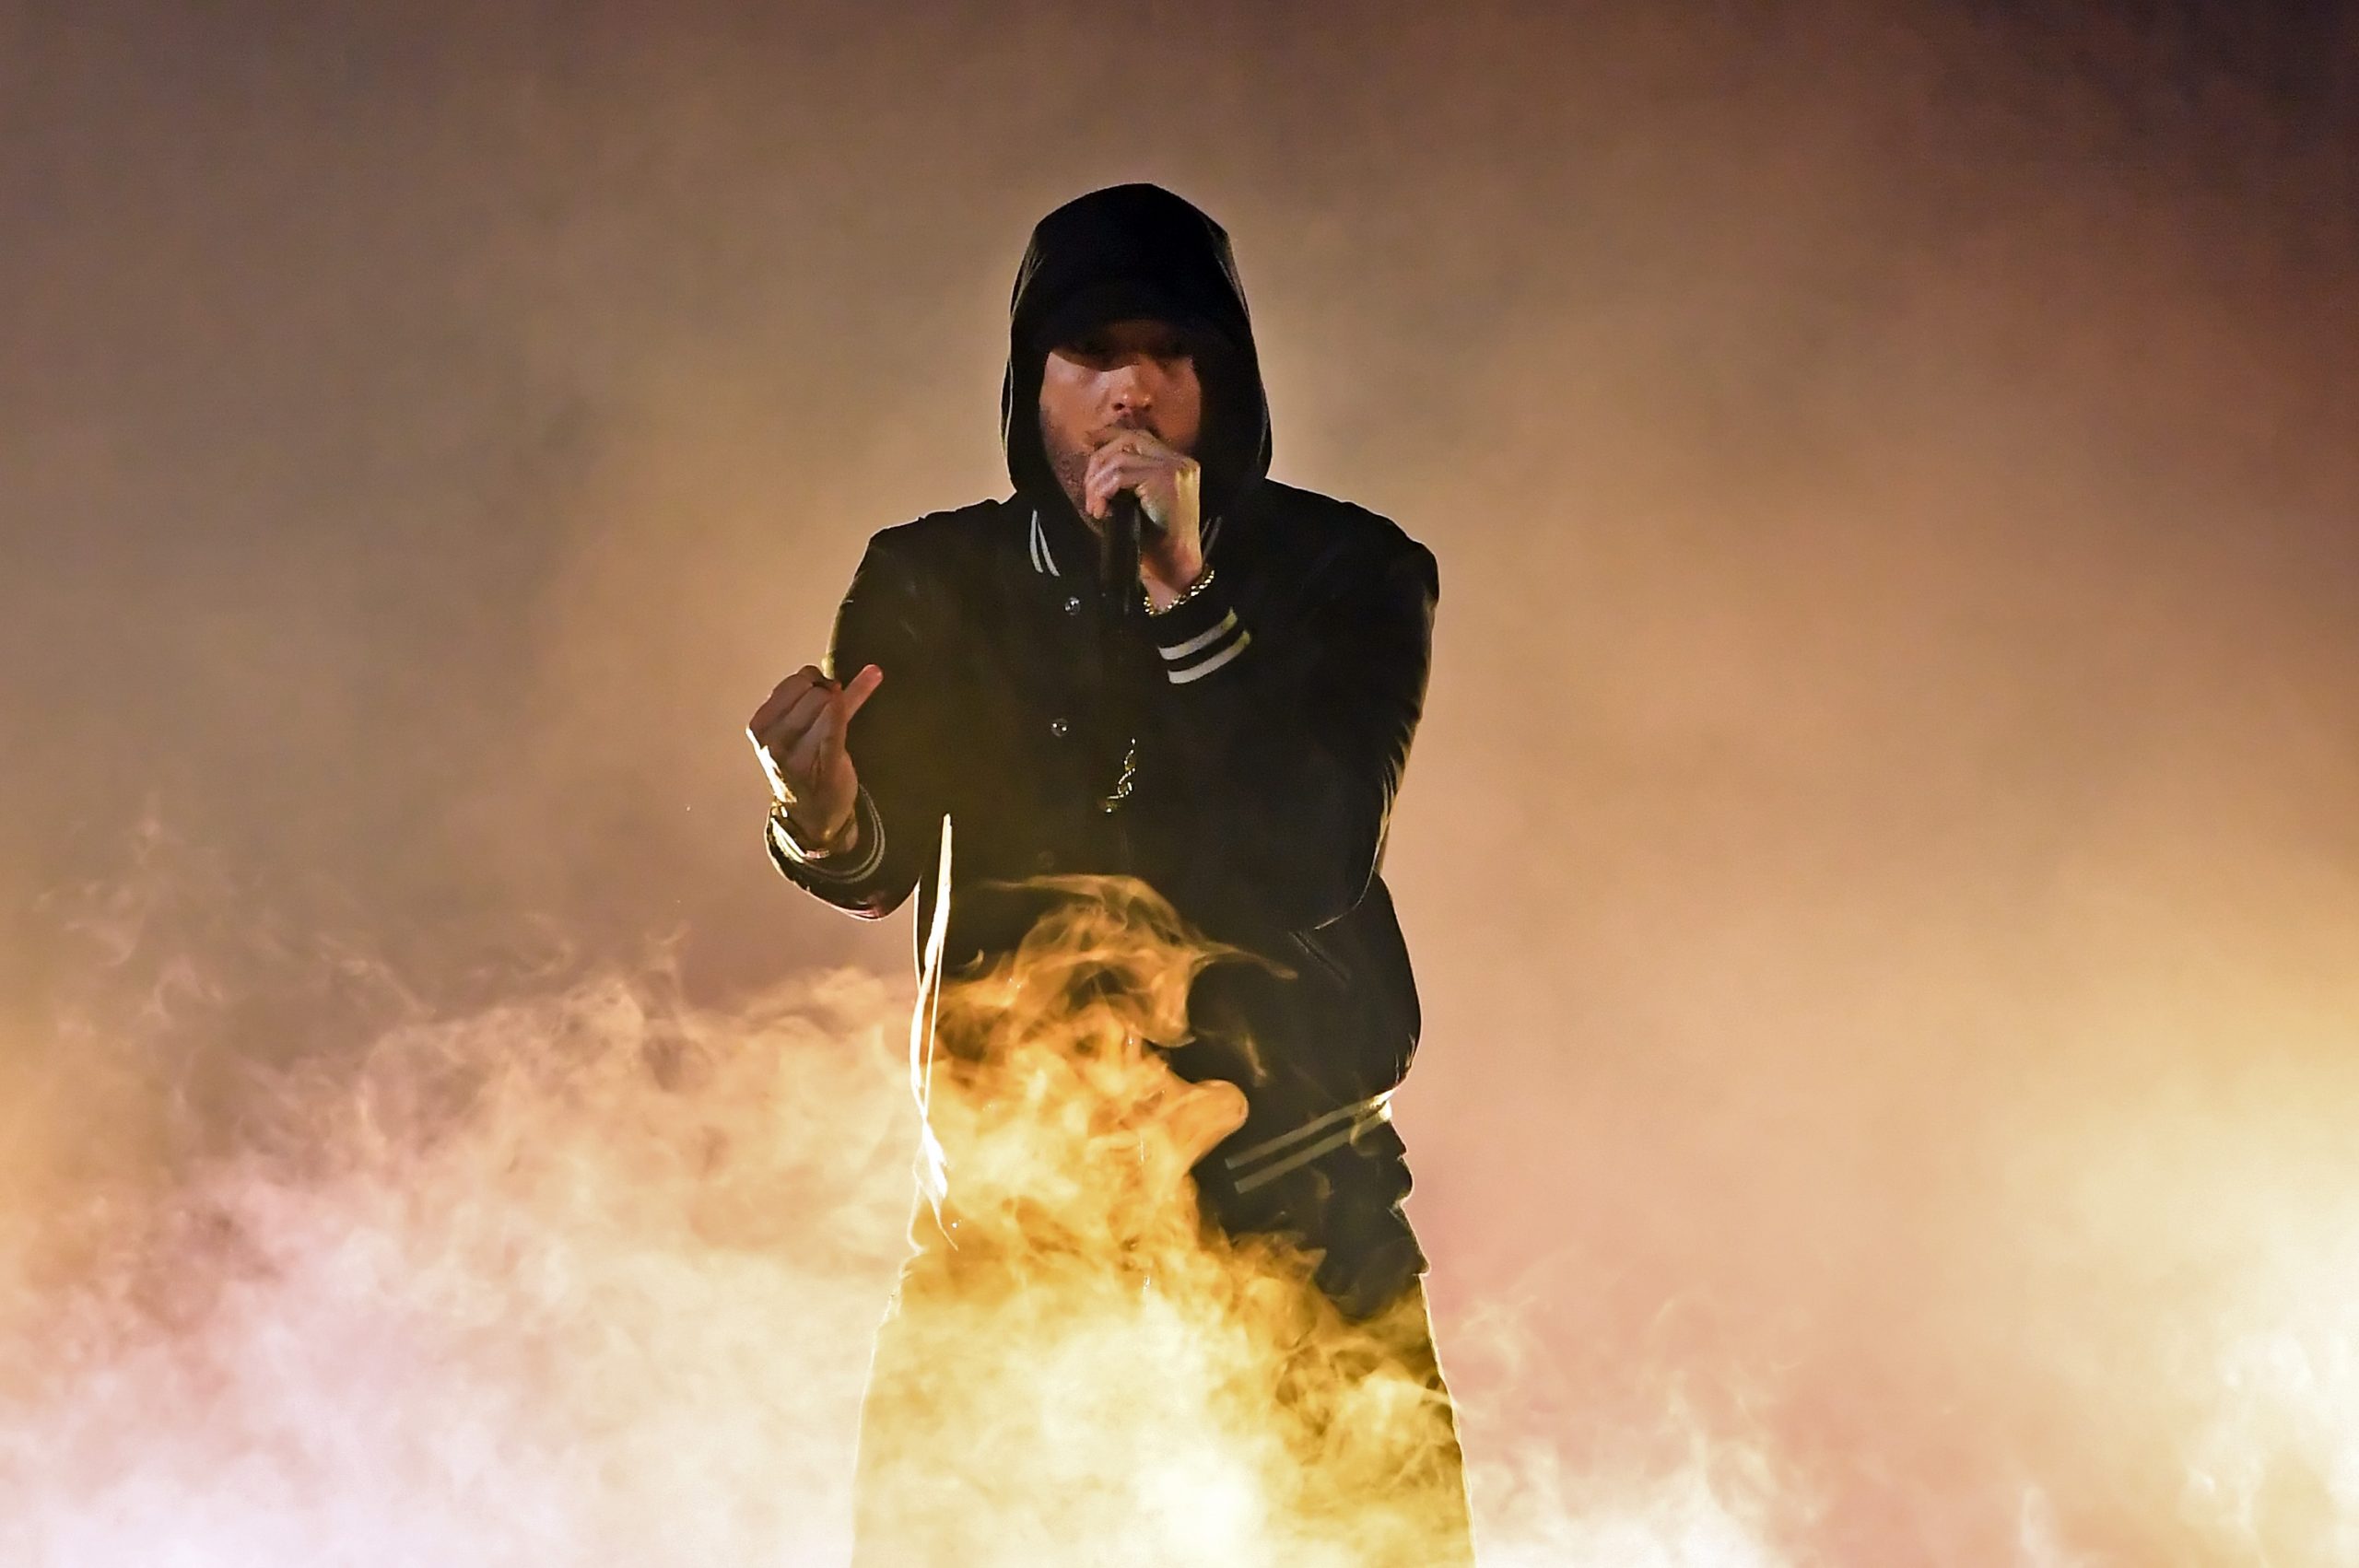 Eminem performs onstage during the 2018 iHeartRadio Music Awards